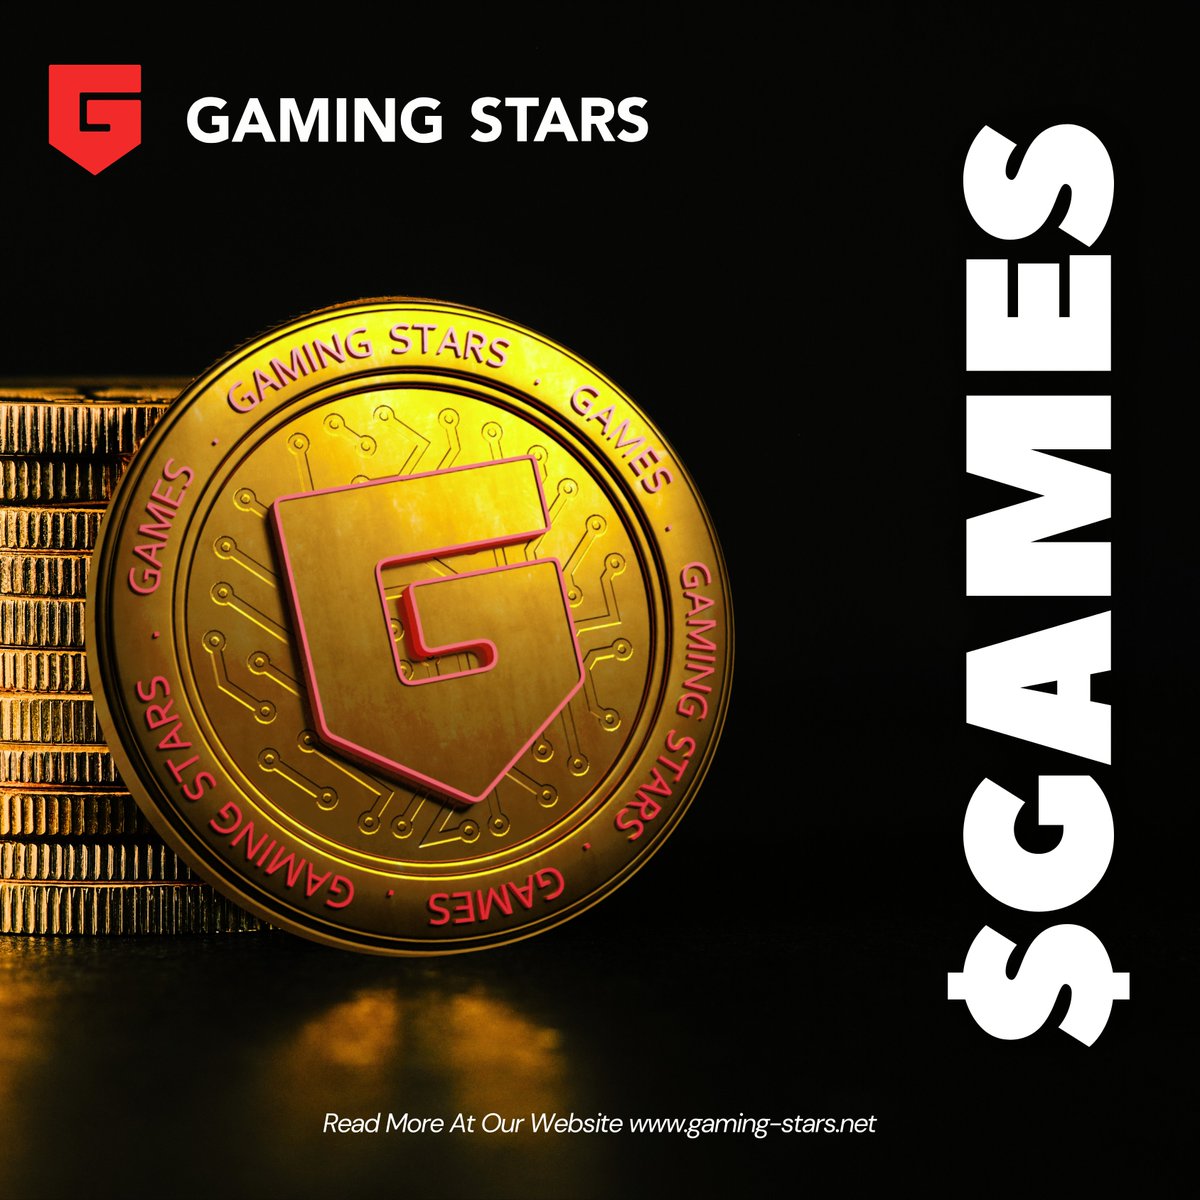 Compete in your favorite video games like FIFA for real money on Gaming Stars! Select your game, device, and stake, and we'll match you with an opponent. Win big and level up your gaming experience! 
$Games #GamingStars #Esports #CompetitiveGaming #FIFA #GamingCommunity #GameOn